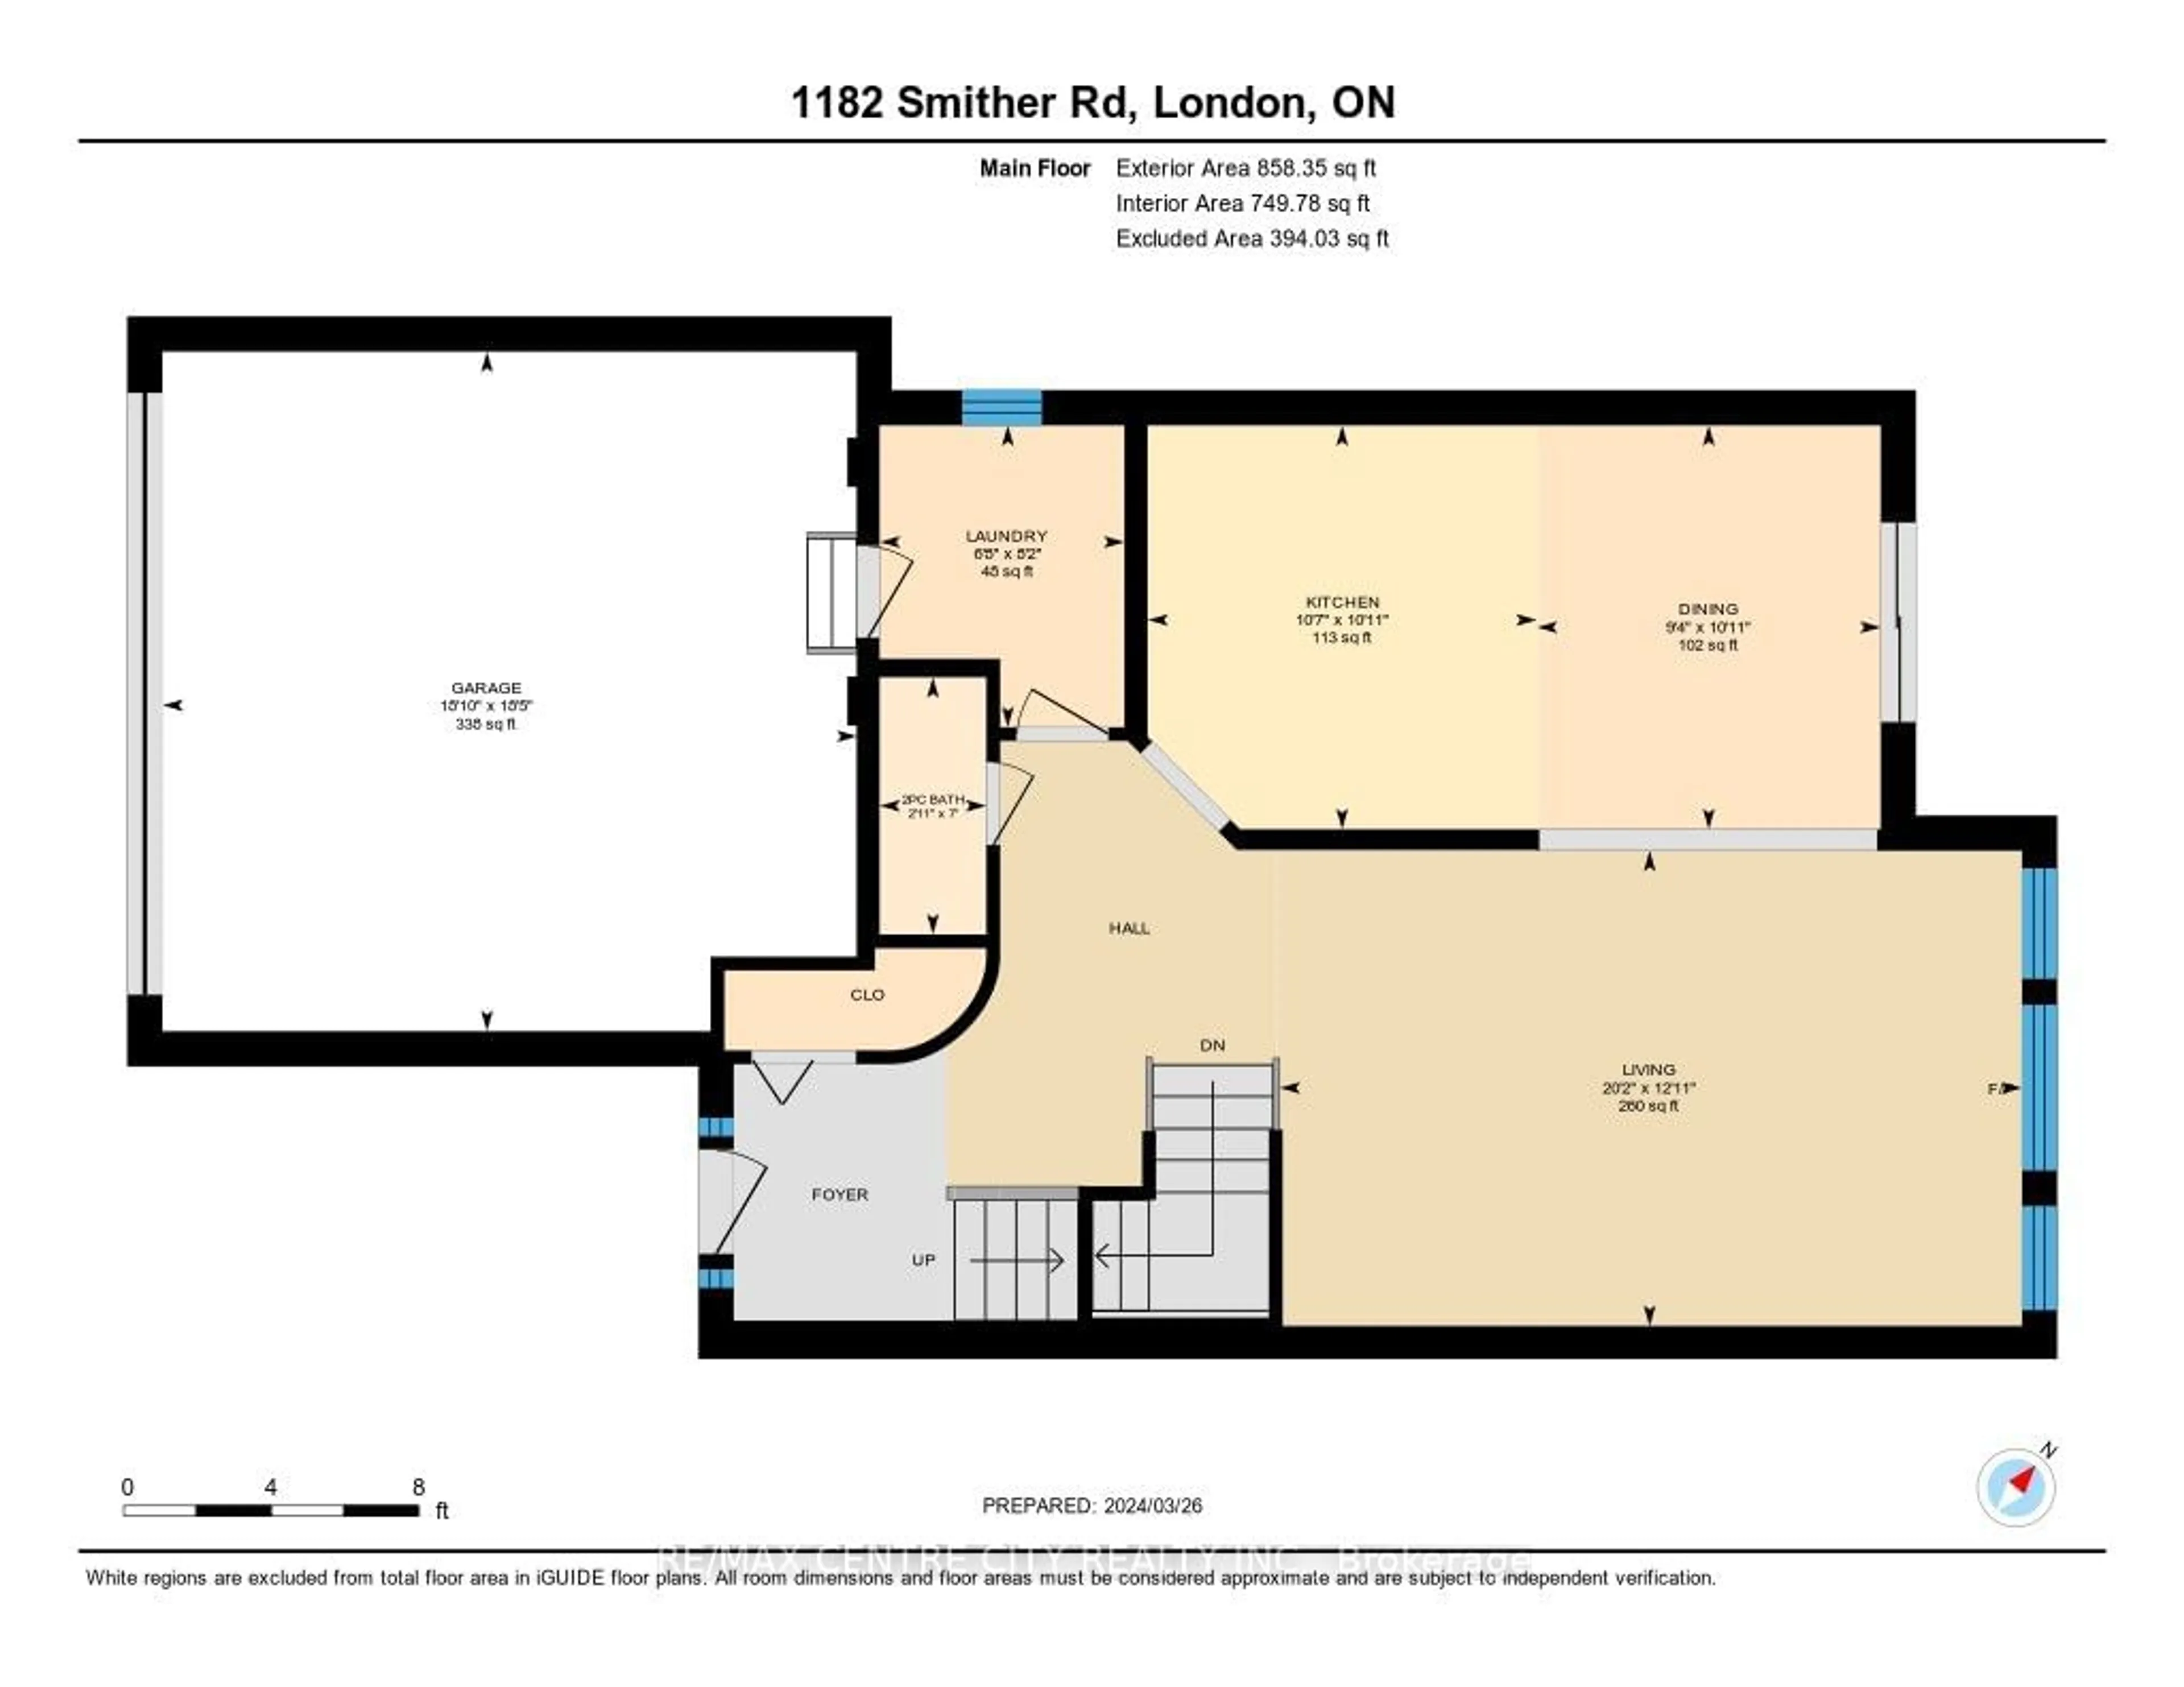 Floor plan for 1182 Smither Rd, London Ontario N6G 5R8